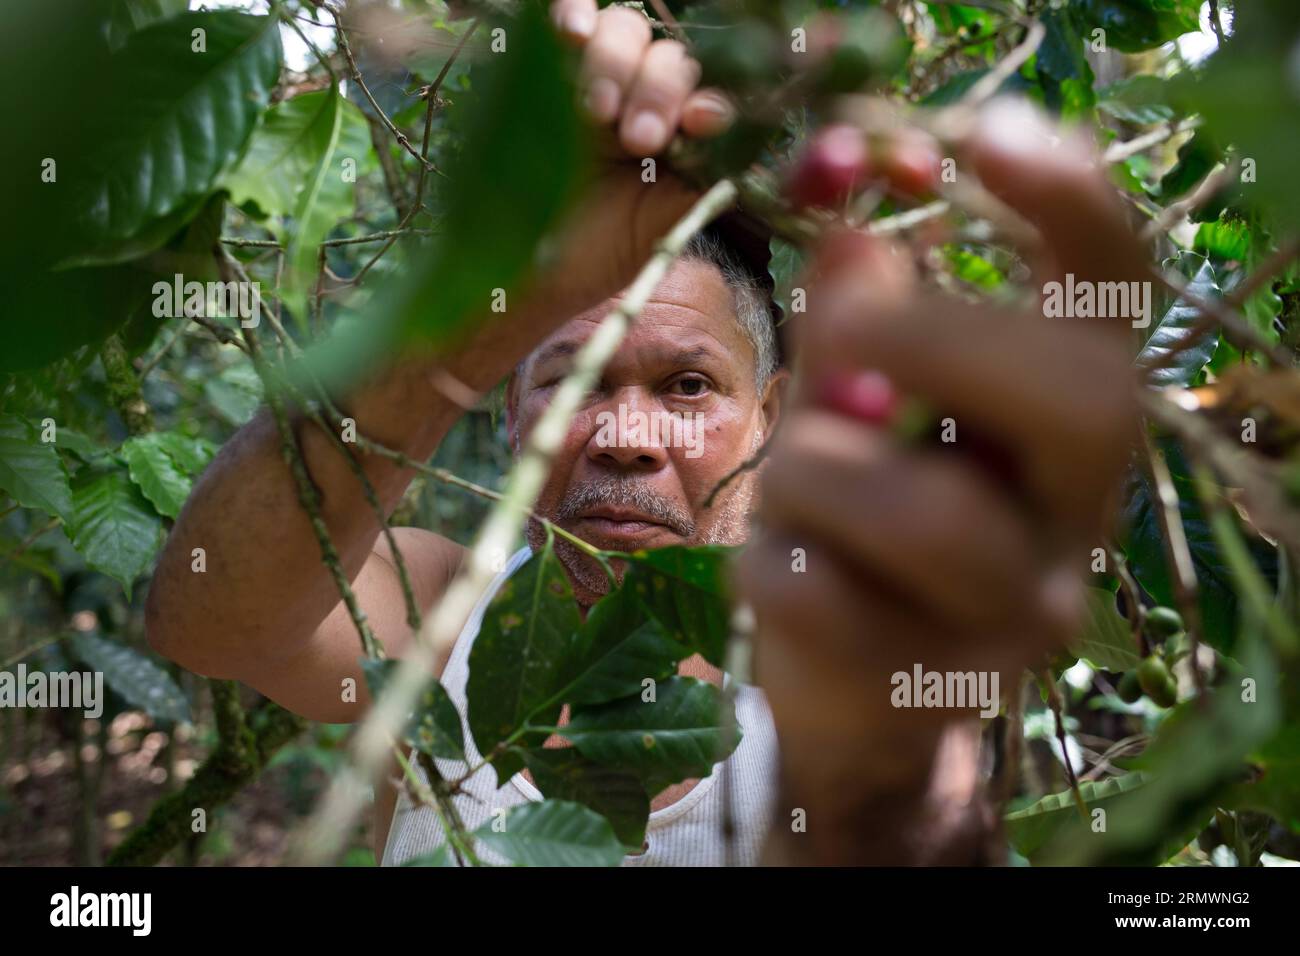 (141106) -- SAN CRISTOBAL,  -- Image taken on Oct. 28, 2014 shows a day laborer collecting coffee beans at an organic farm managed by La Esperanza Association of Coffee Growers (ASOCAES, for its acronym in Spanish) of Los Cacaos municipality, in San Cristobal, Dominican Republic. The life of 10 percent of the Dominican population revolves around coffee production. Fran Afonso) DOMINICAN REPUBLIC-SAN CRISTOBAL-AGRICULTURE-COFFEE e FRANxAFONSO PUBLICATIONxNOTxINxCHN   San Cristobal Image Taken ON OCT 28 2014 Shows a Day laborer collecting Coffee Beans AT to Organic Farm Managed by La Esperanza A Stock Photo